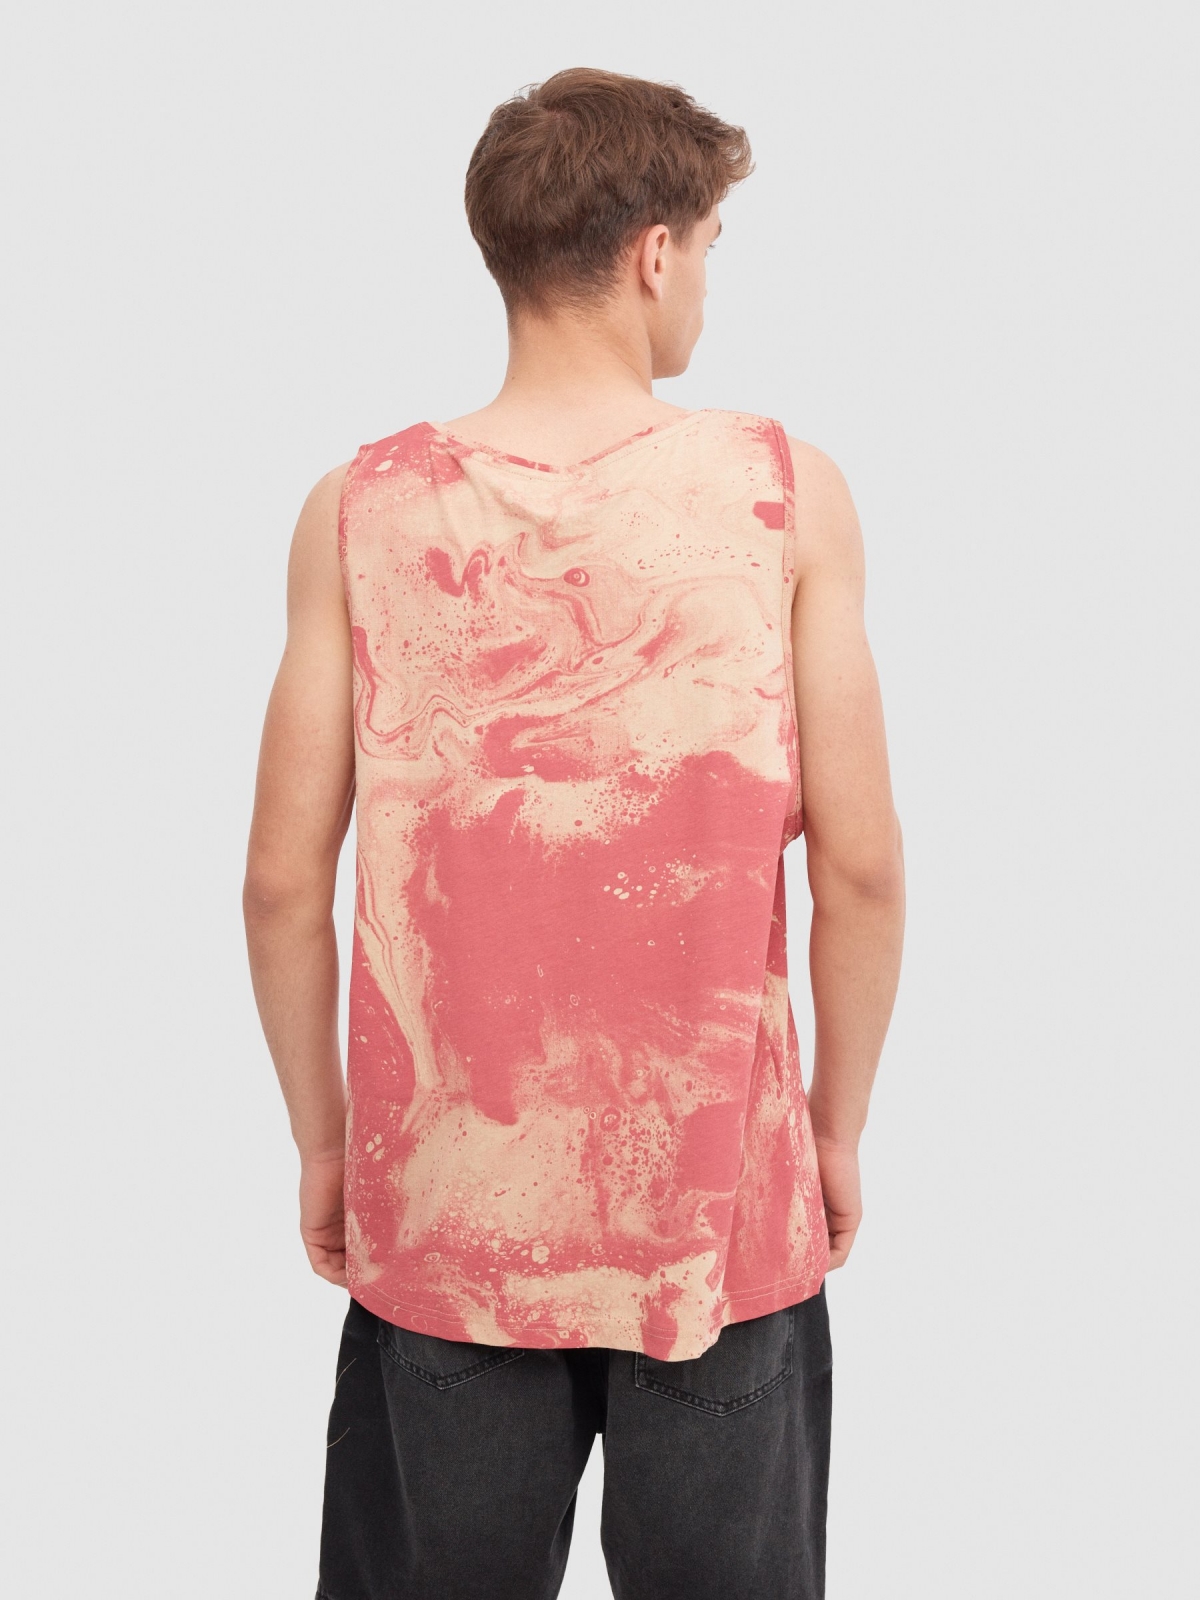 Marbled tank top sand middle back view